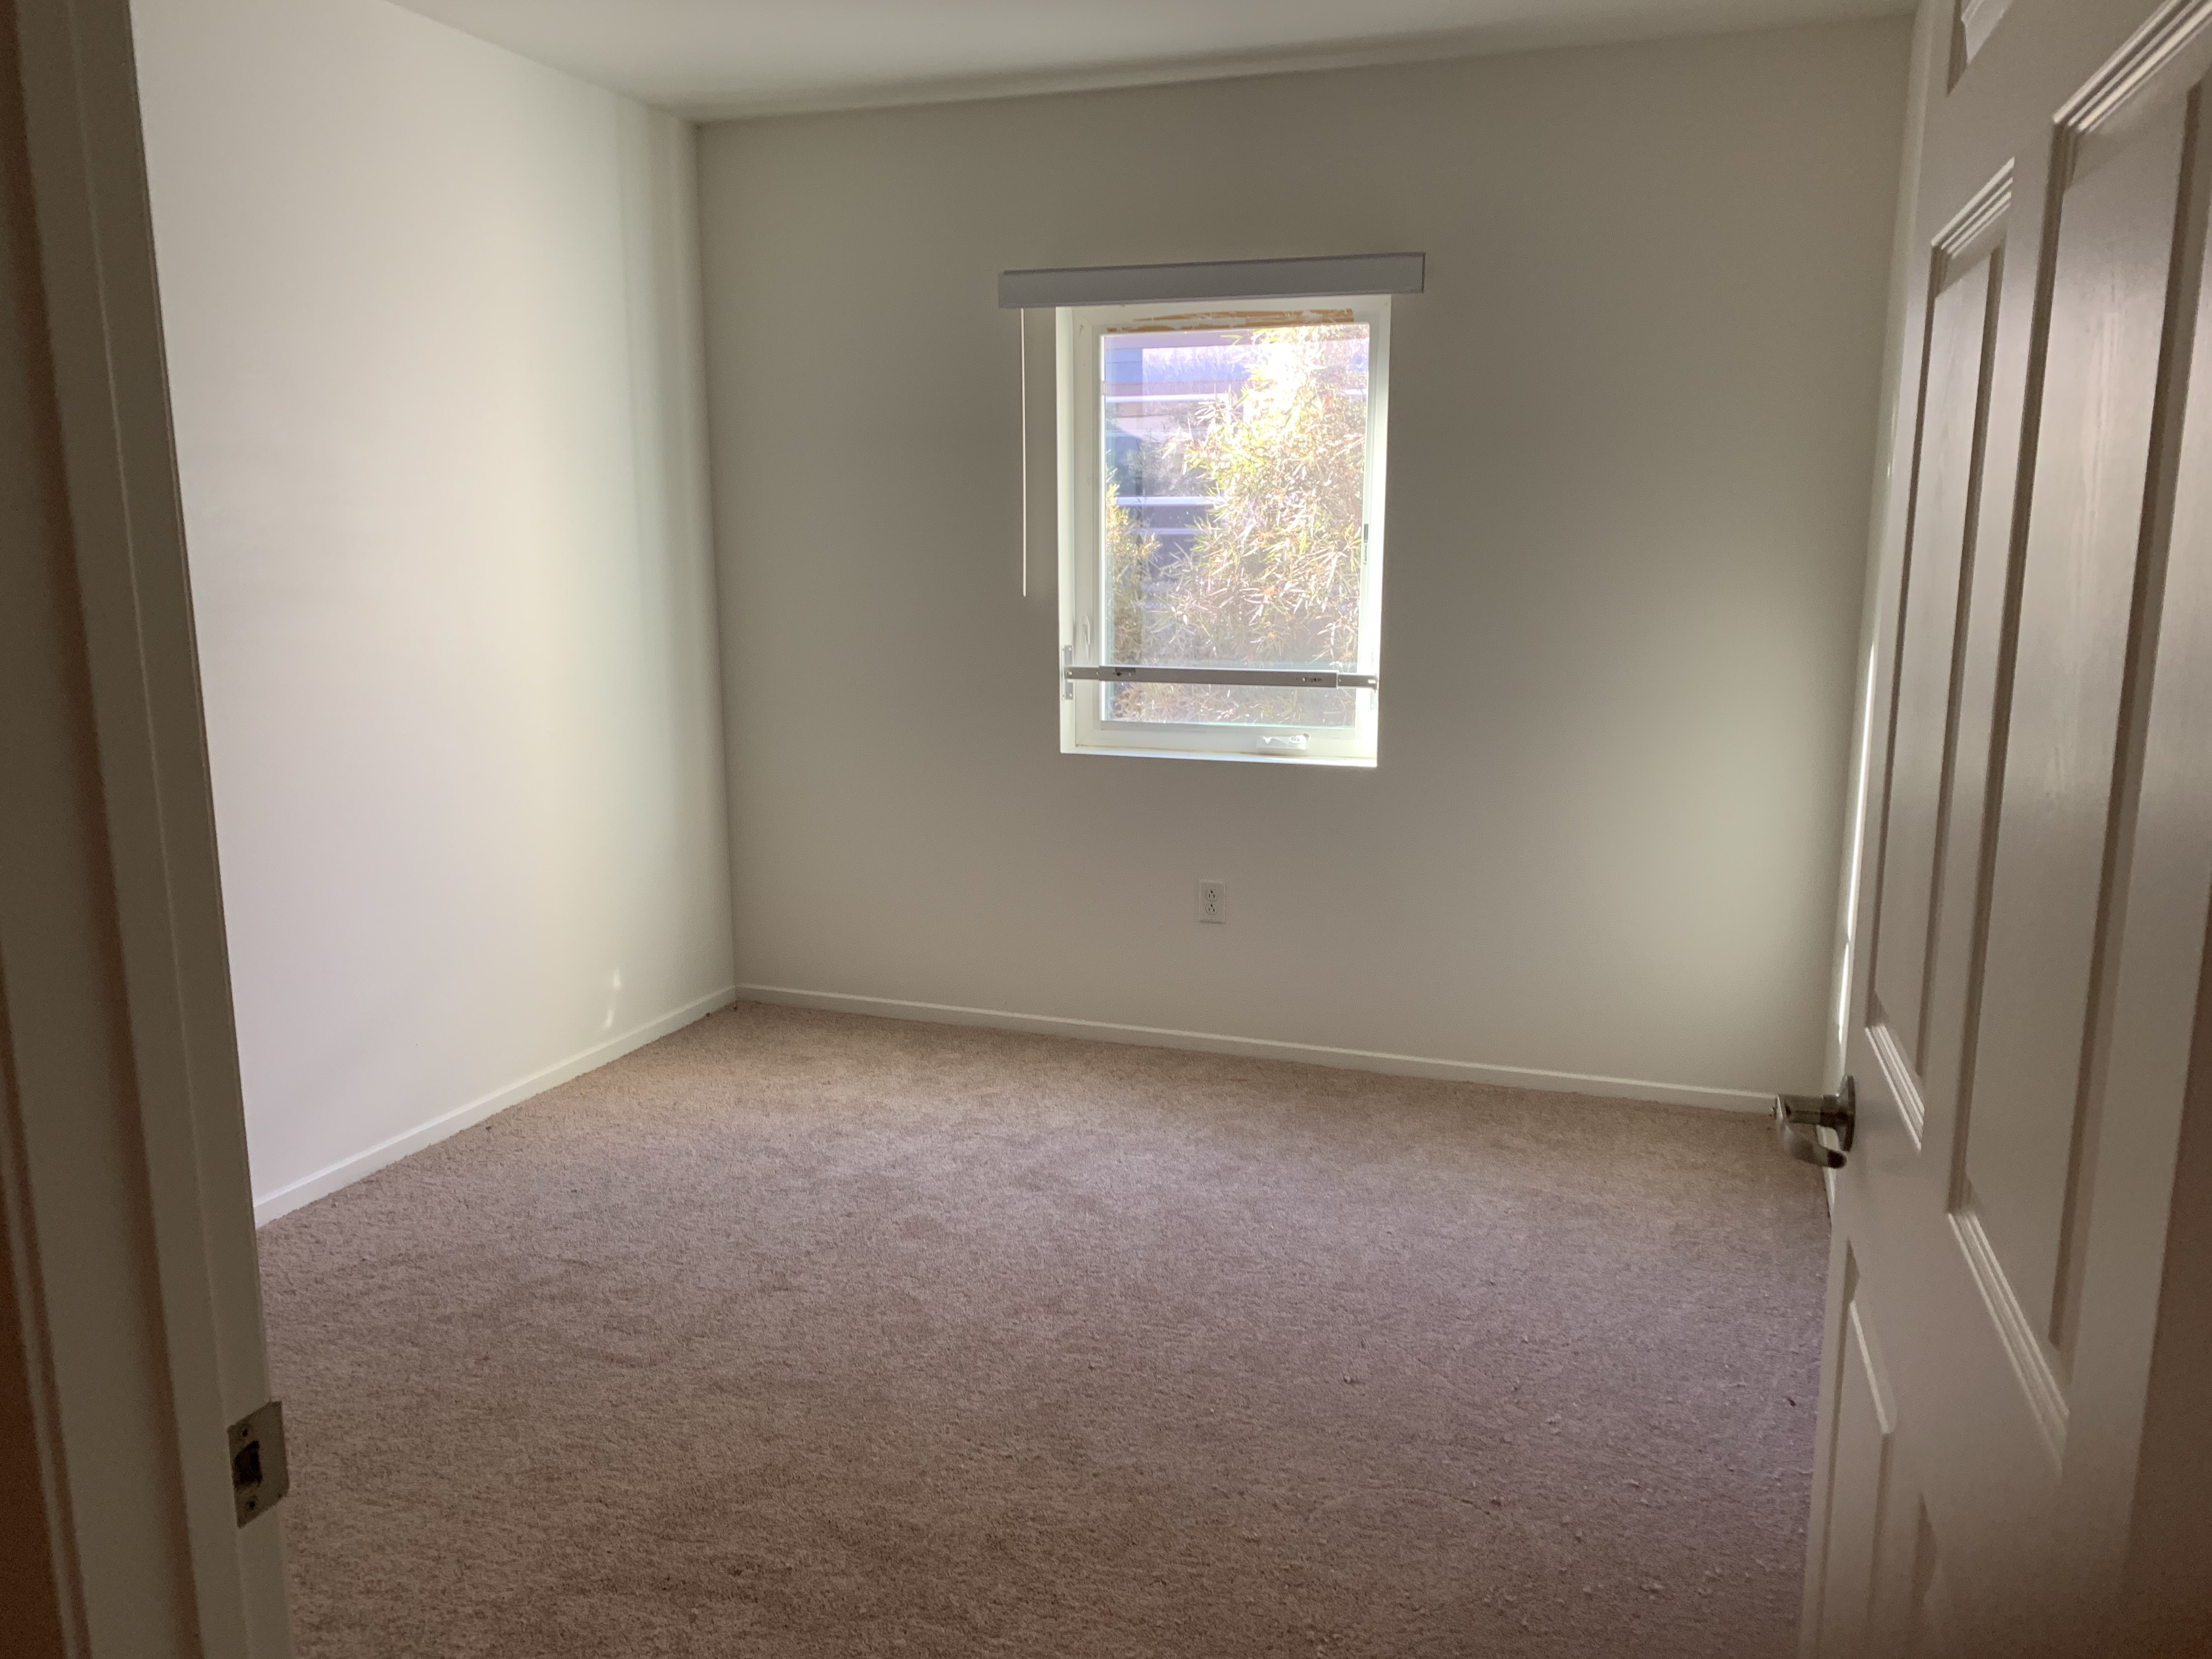 Carpeted bare bedroom in daylight, window right on tree